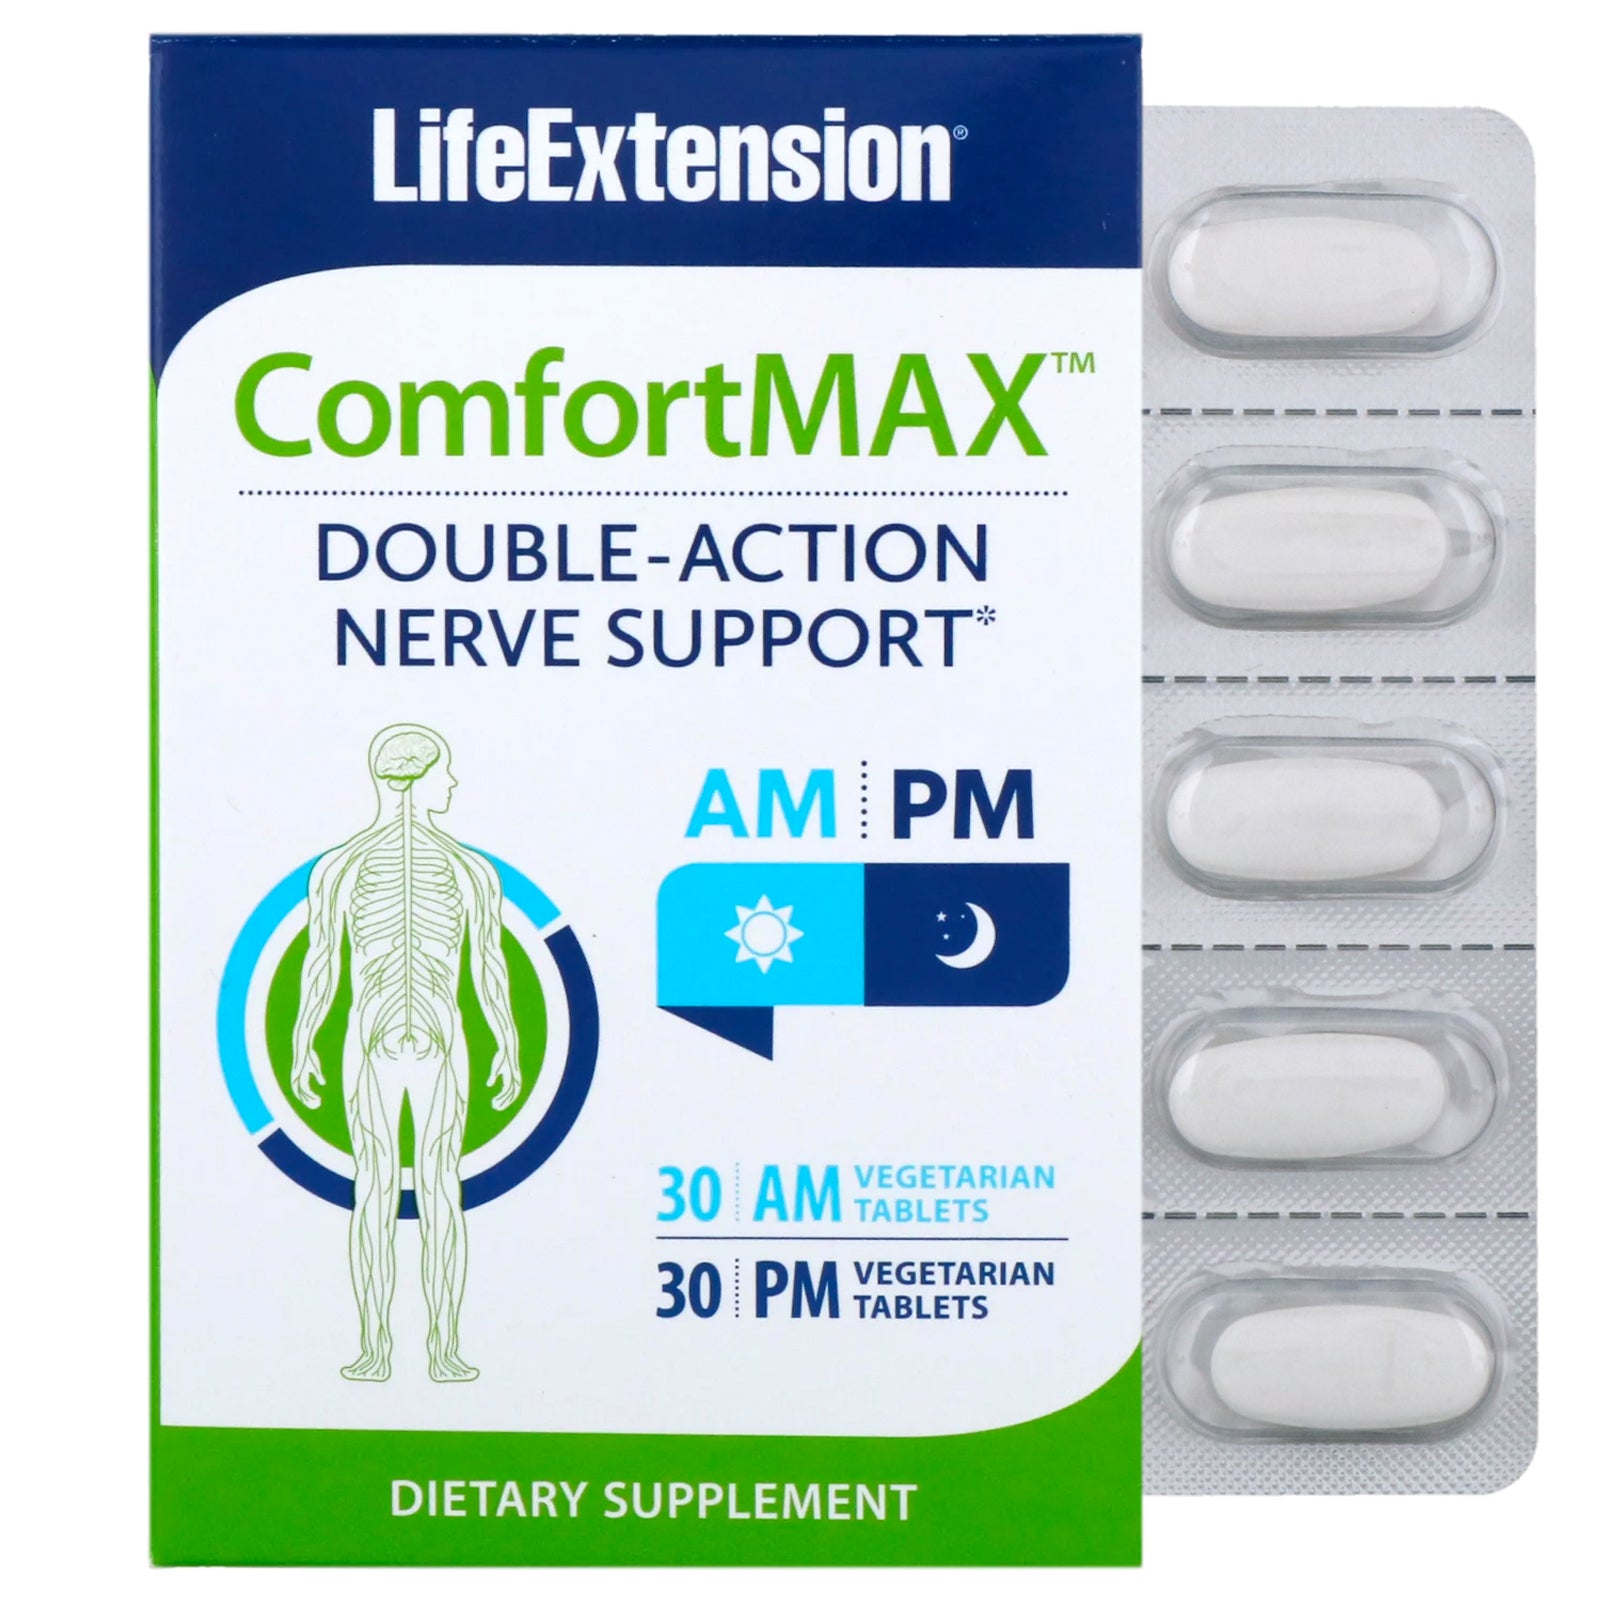 Life Extension, ComfortMAX, Double-Action Nerve Support, For AM & PM, 30 Vegetarian Tablets Each